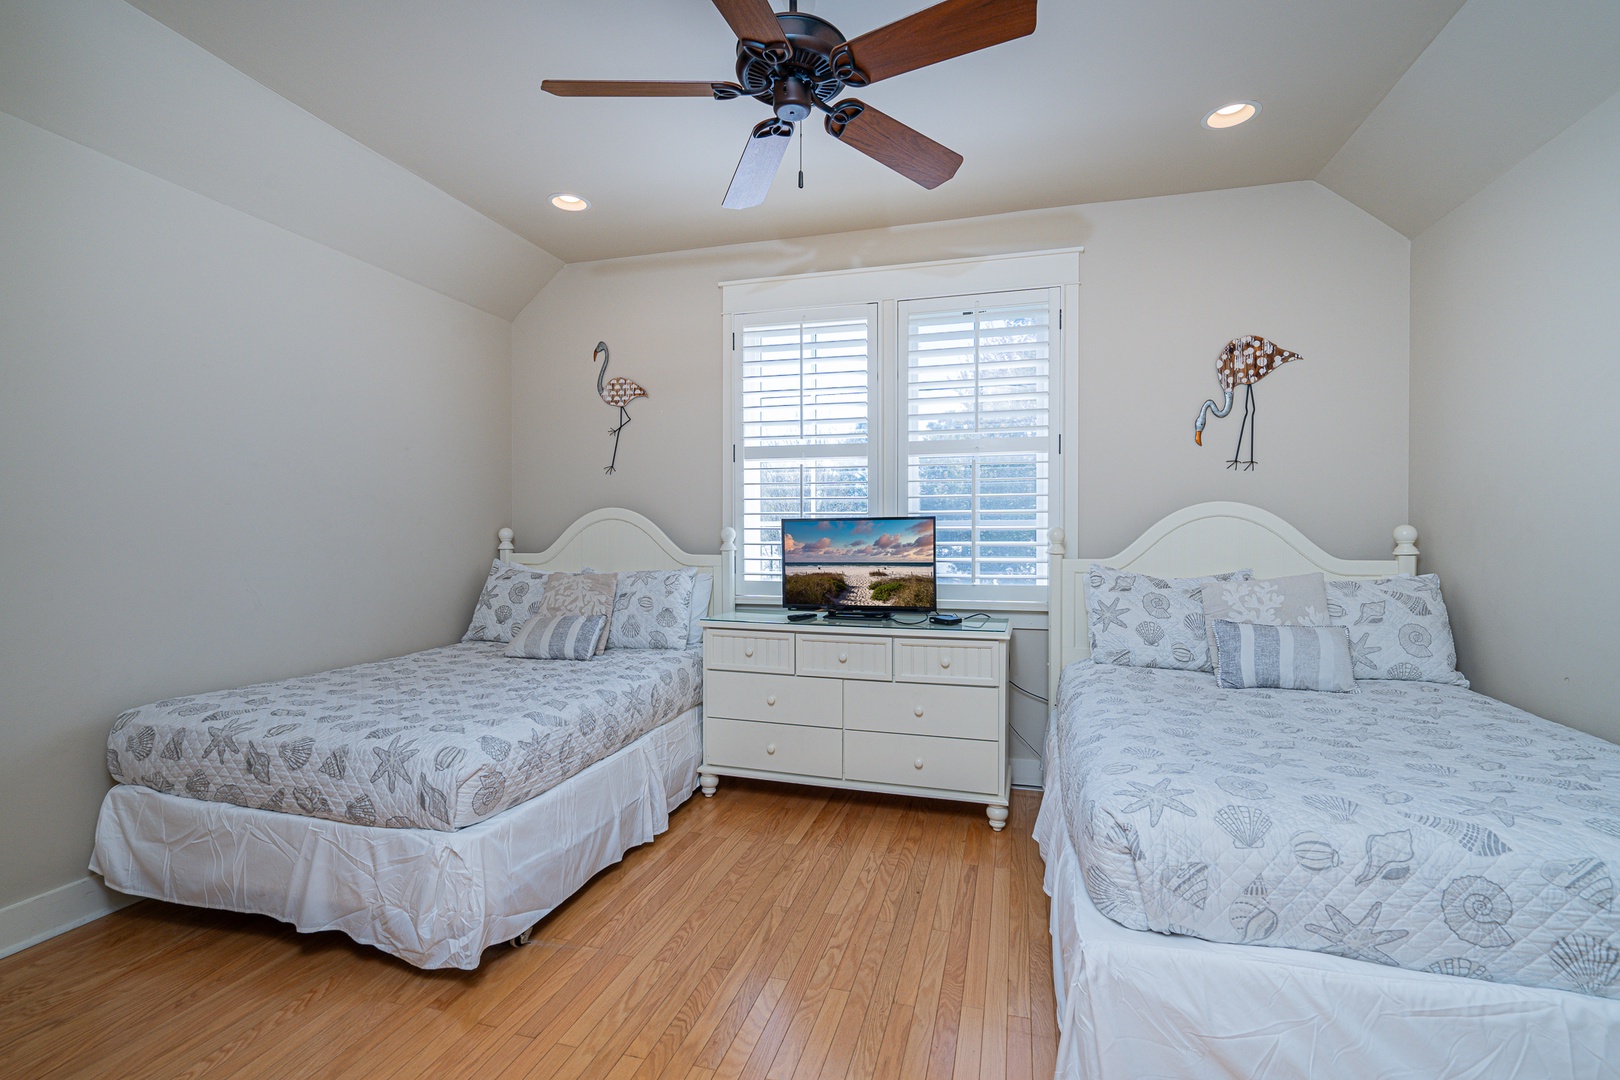 This 2nd-floor bedroom features 2 full beds, 1 twin bed, & a private ensuite.